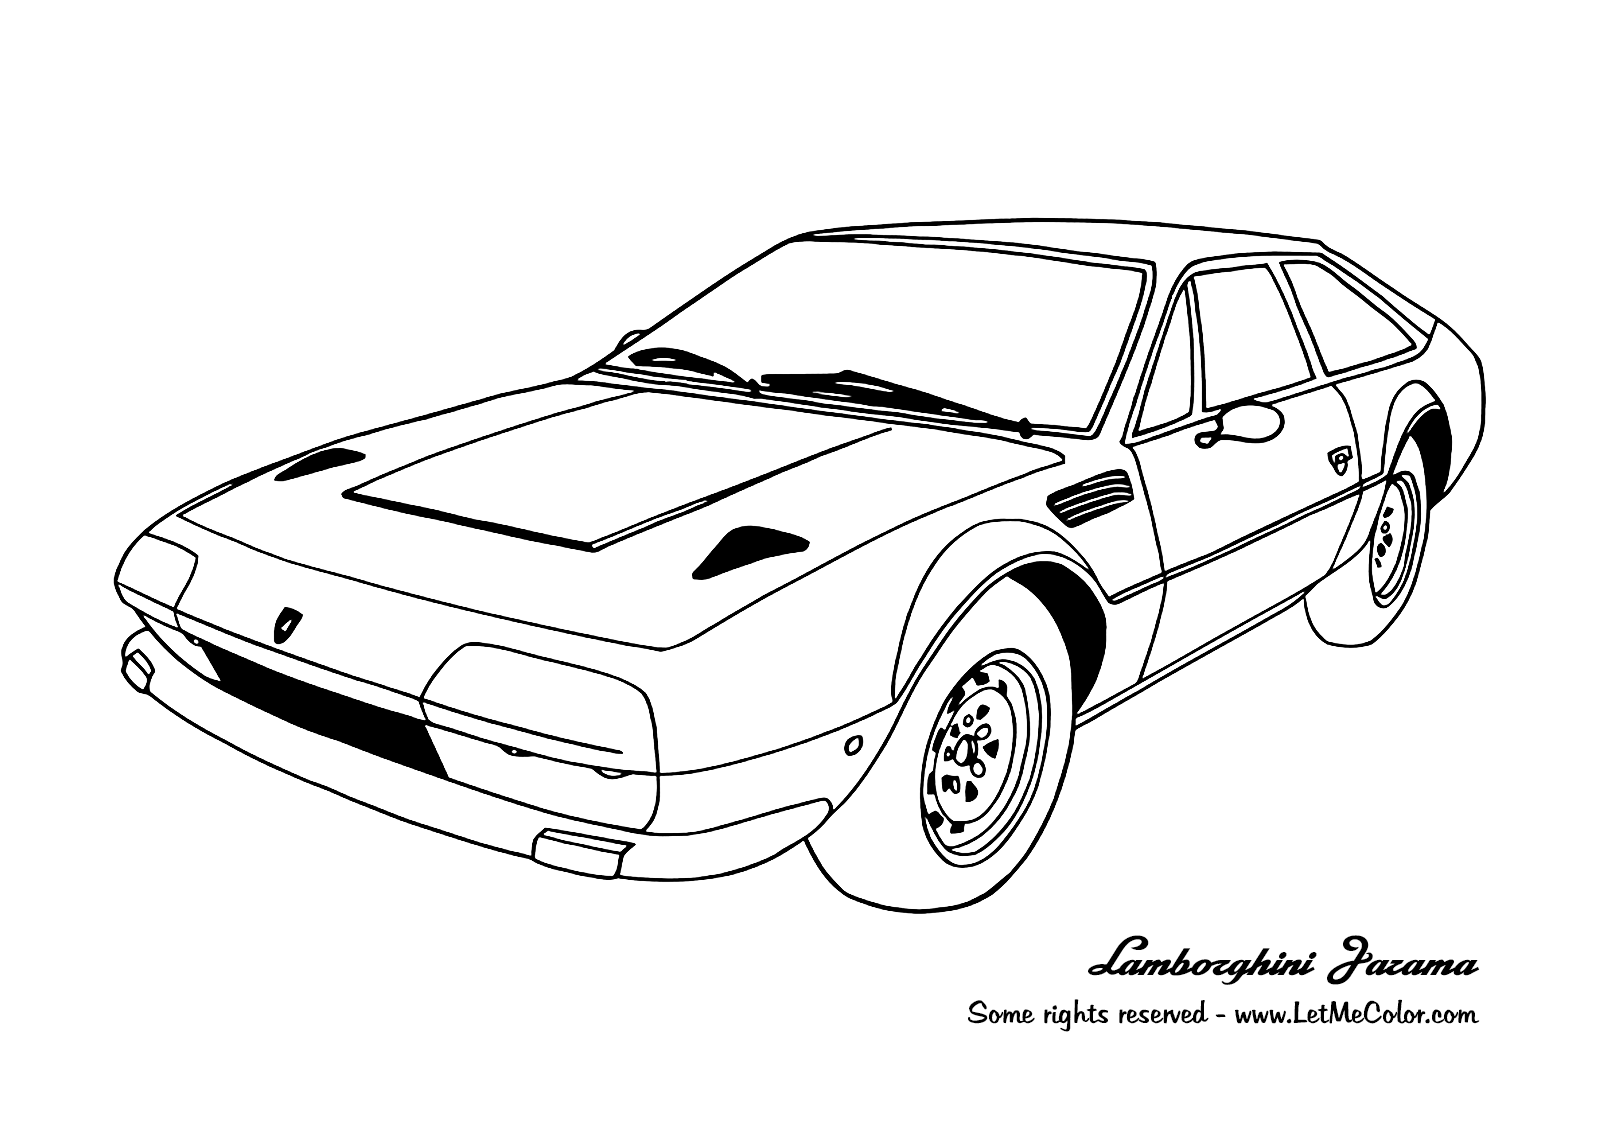 real car coloring pages real cars coloring pages download and print for free pages coloring real car 